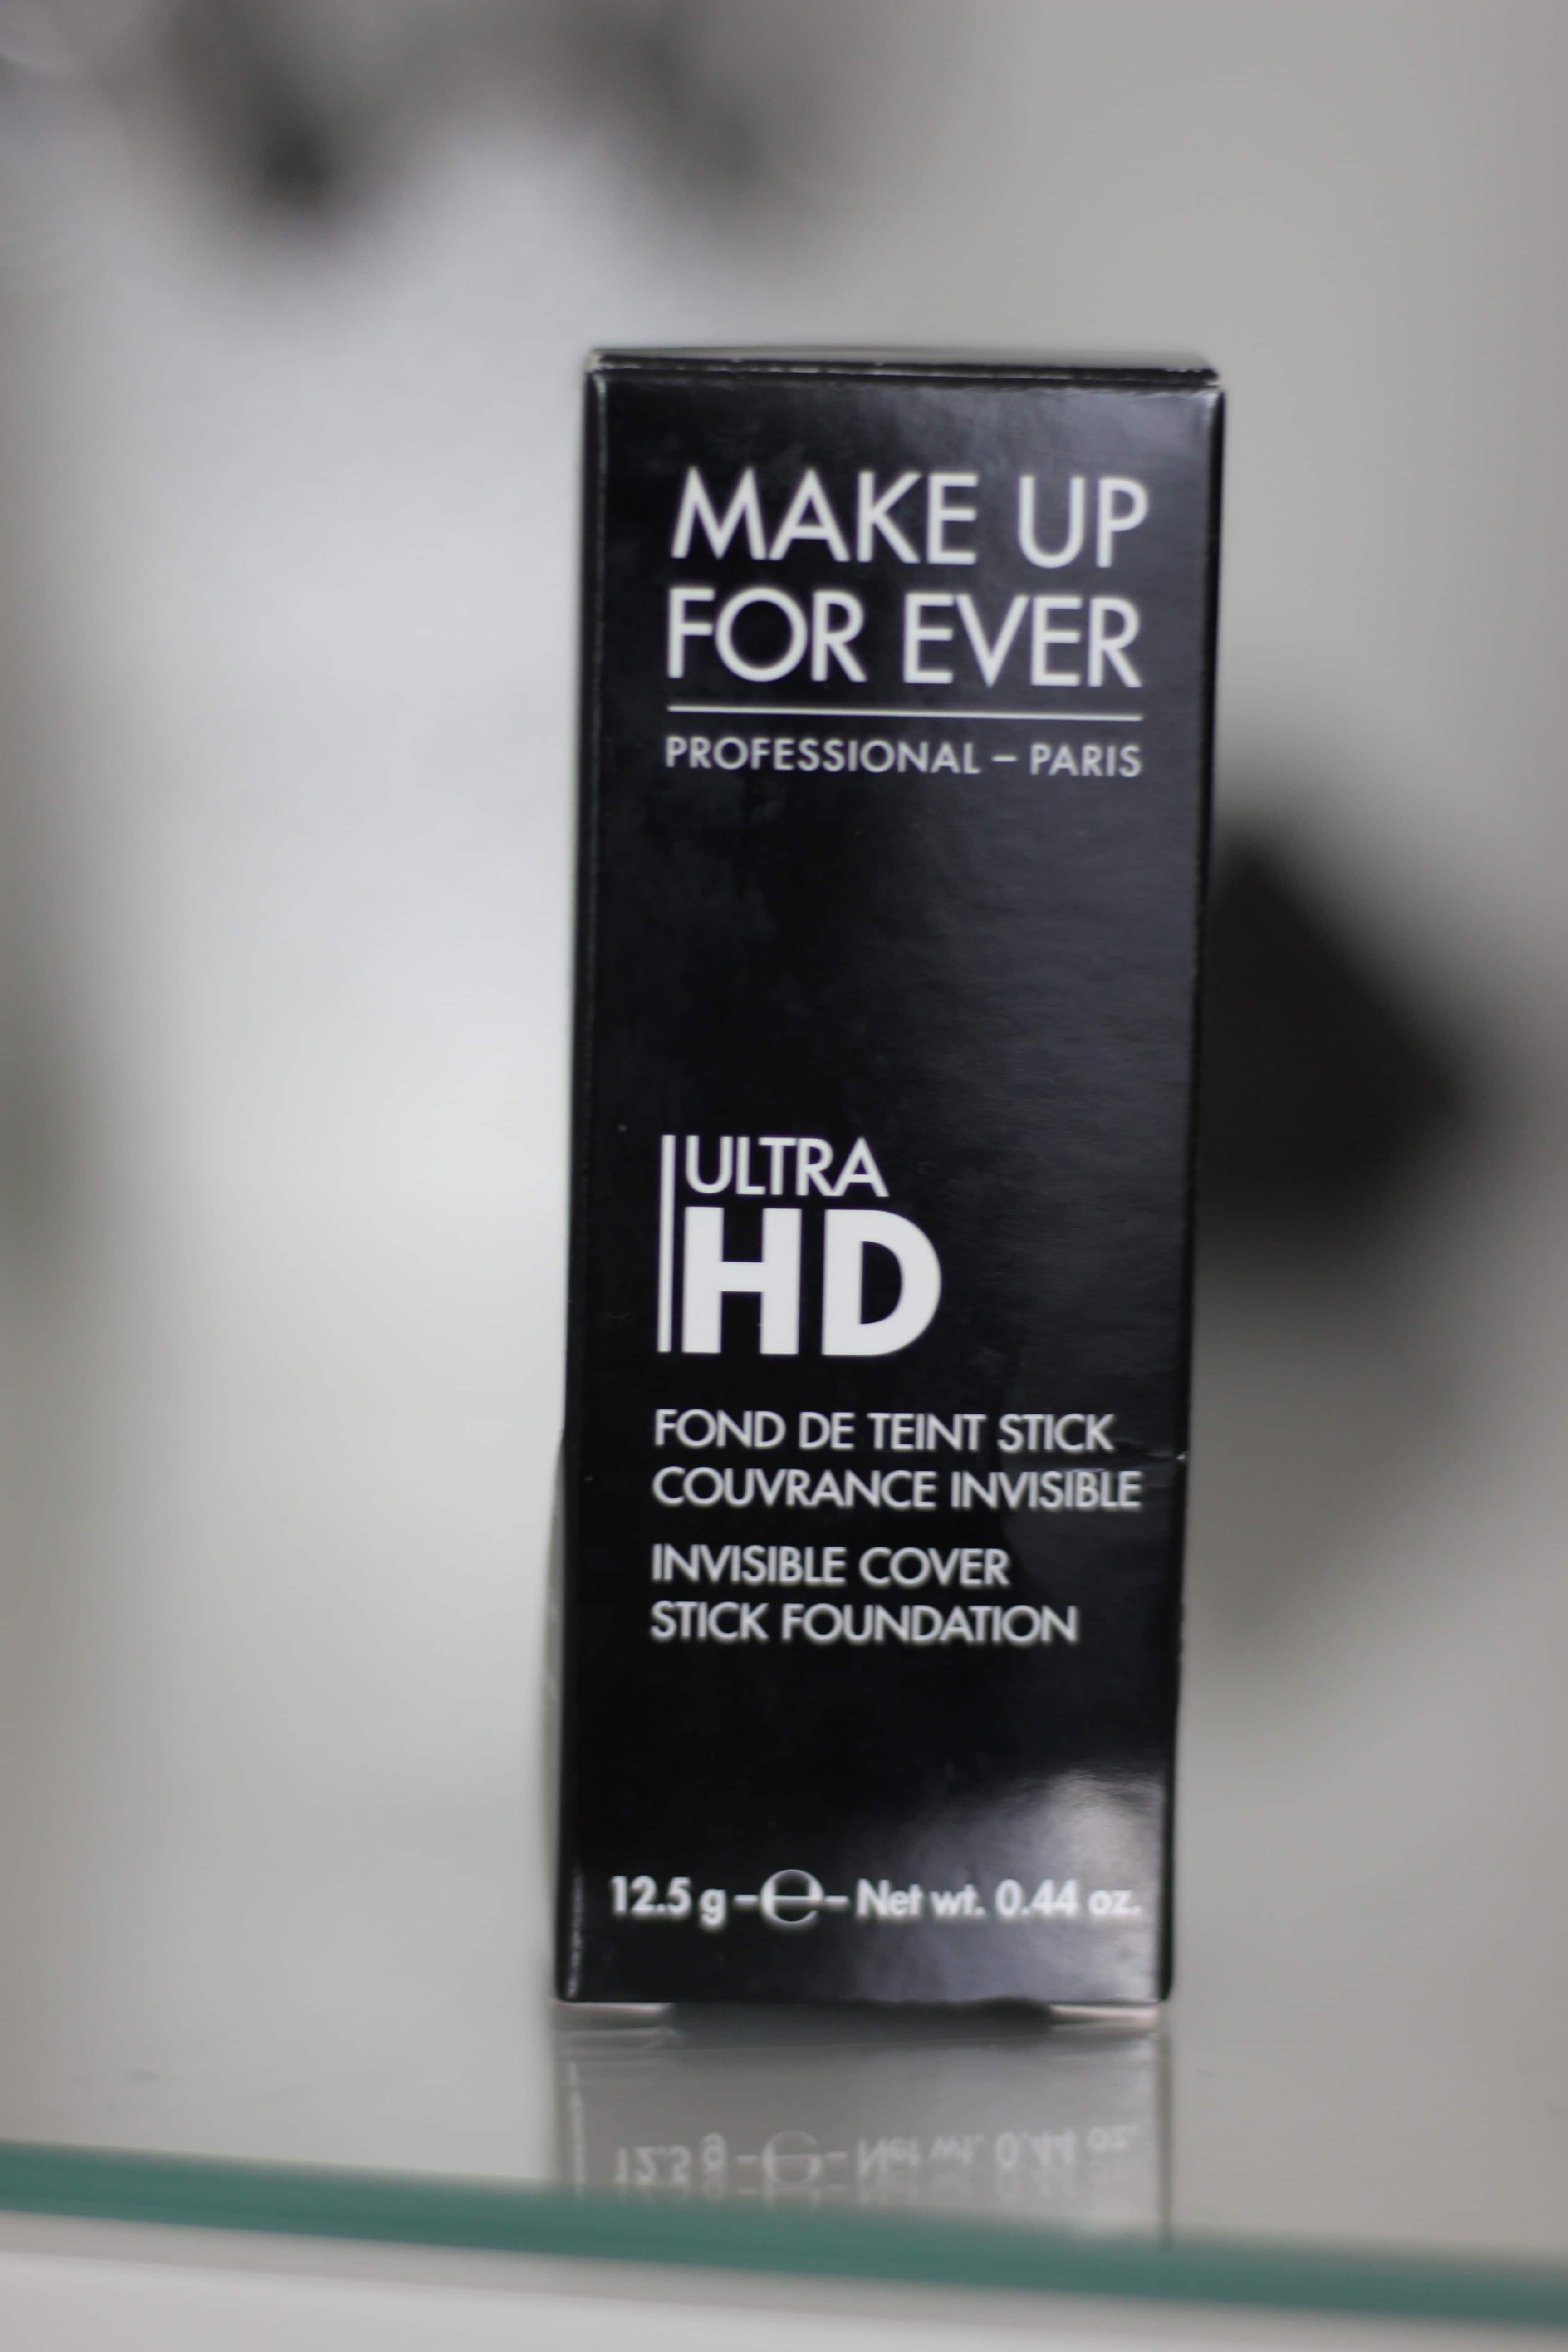 Makeup Forever Ultra Hd Stick